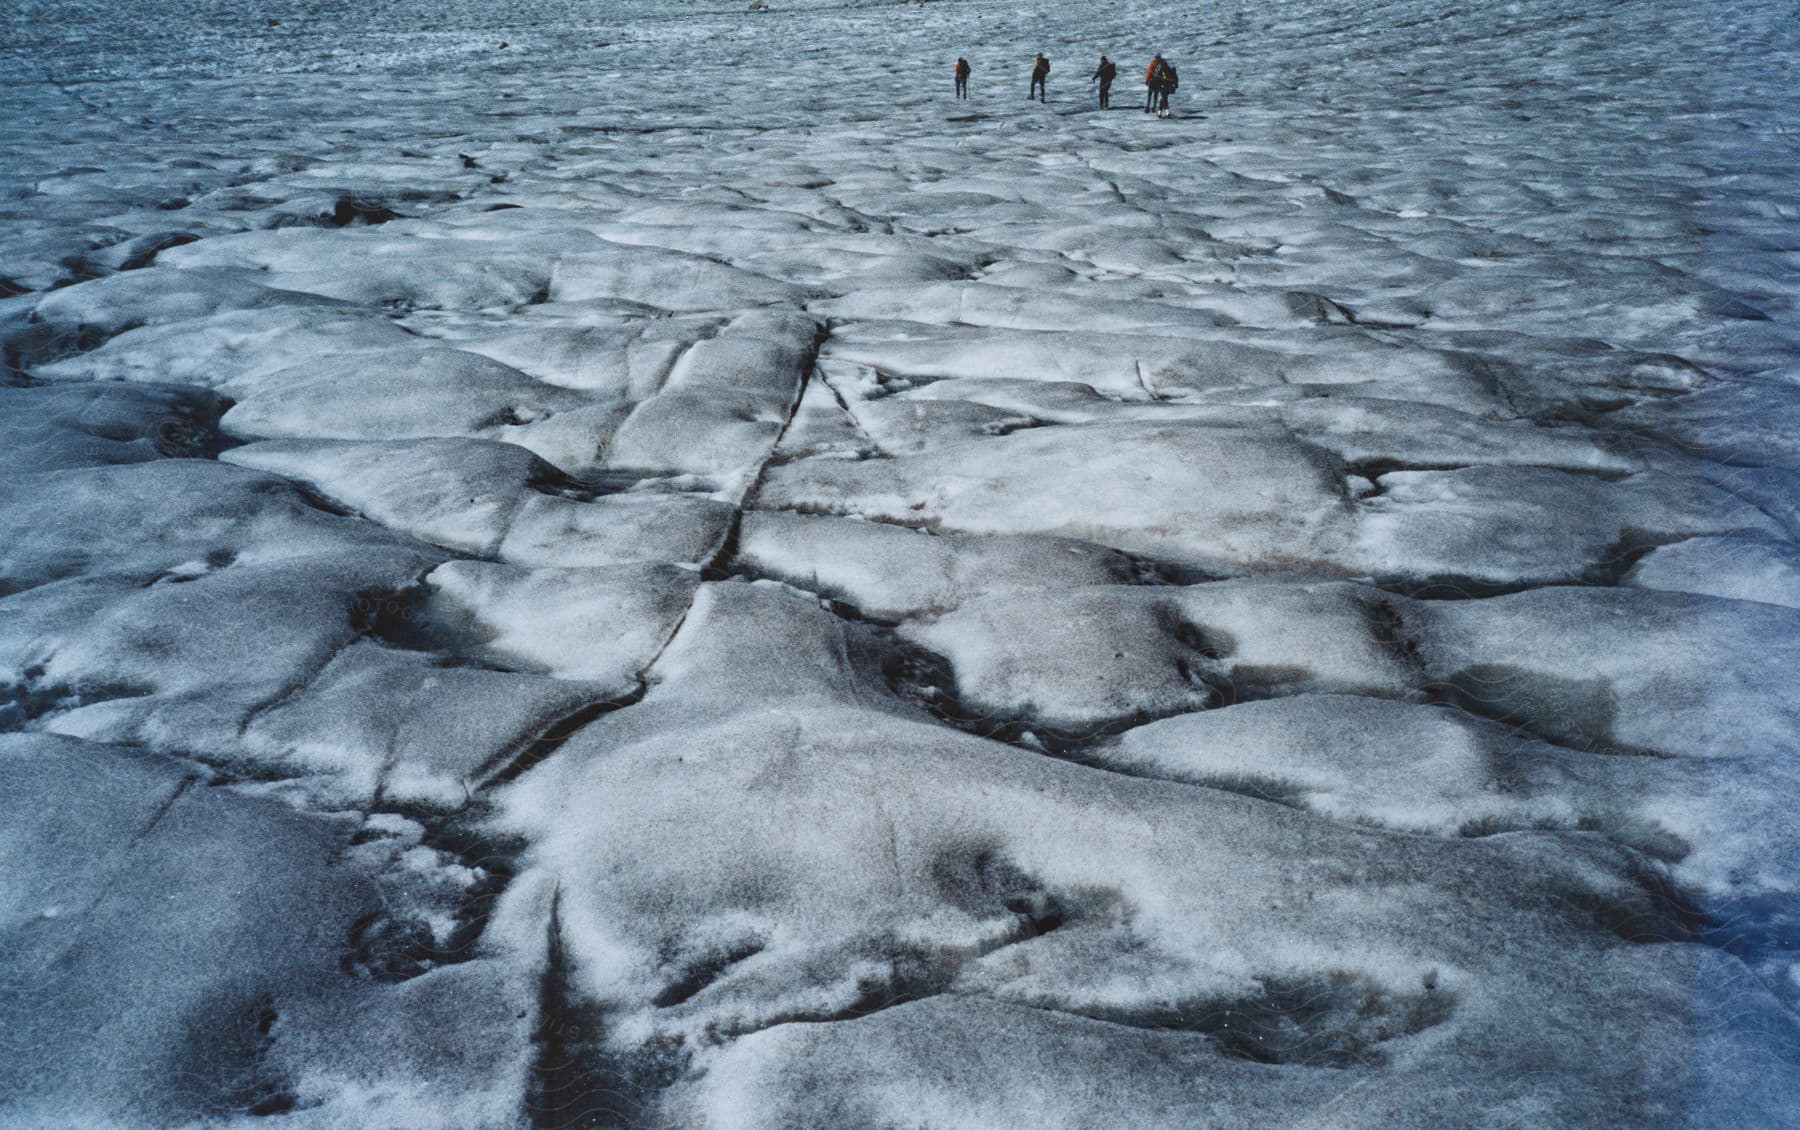 A group of people walking across an ice cap in the swiss alps during a winter hike